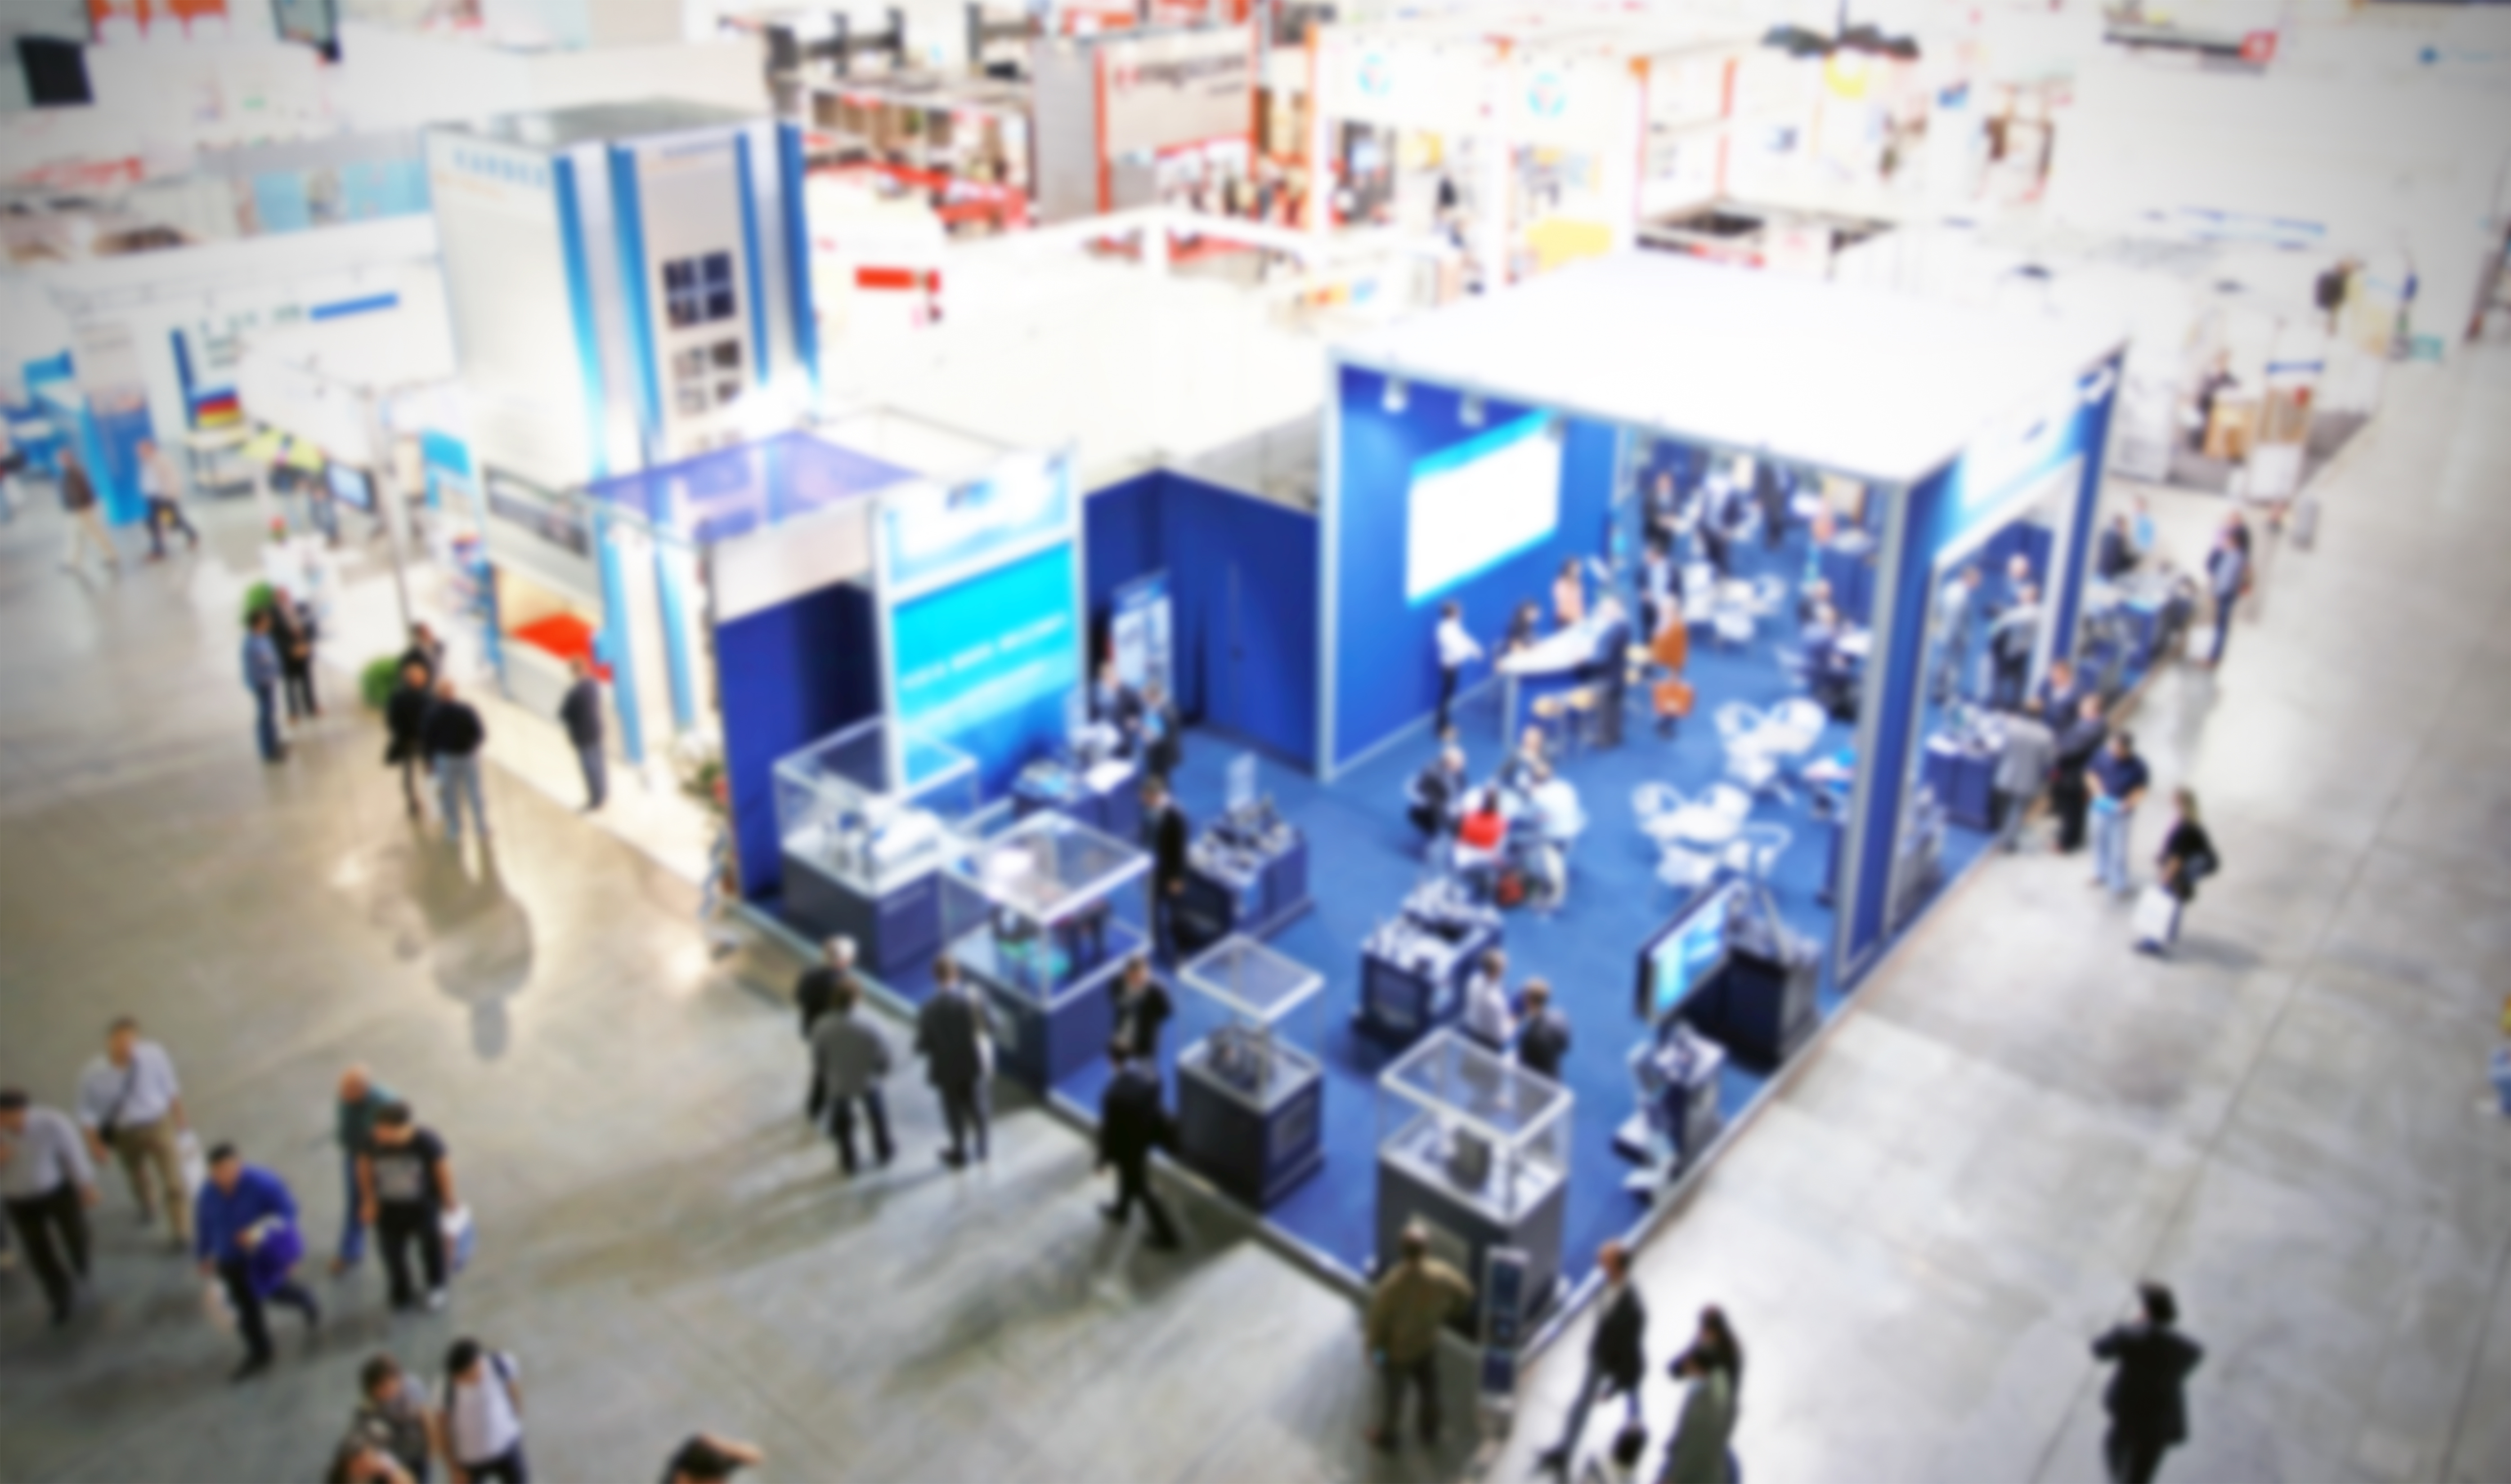 reasons to exhibit at trade shows